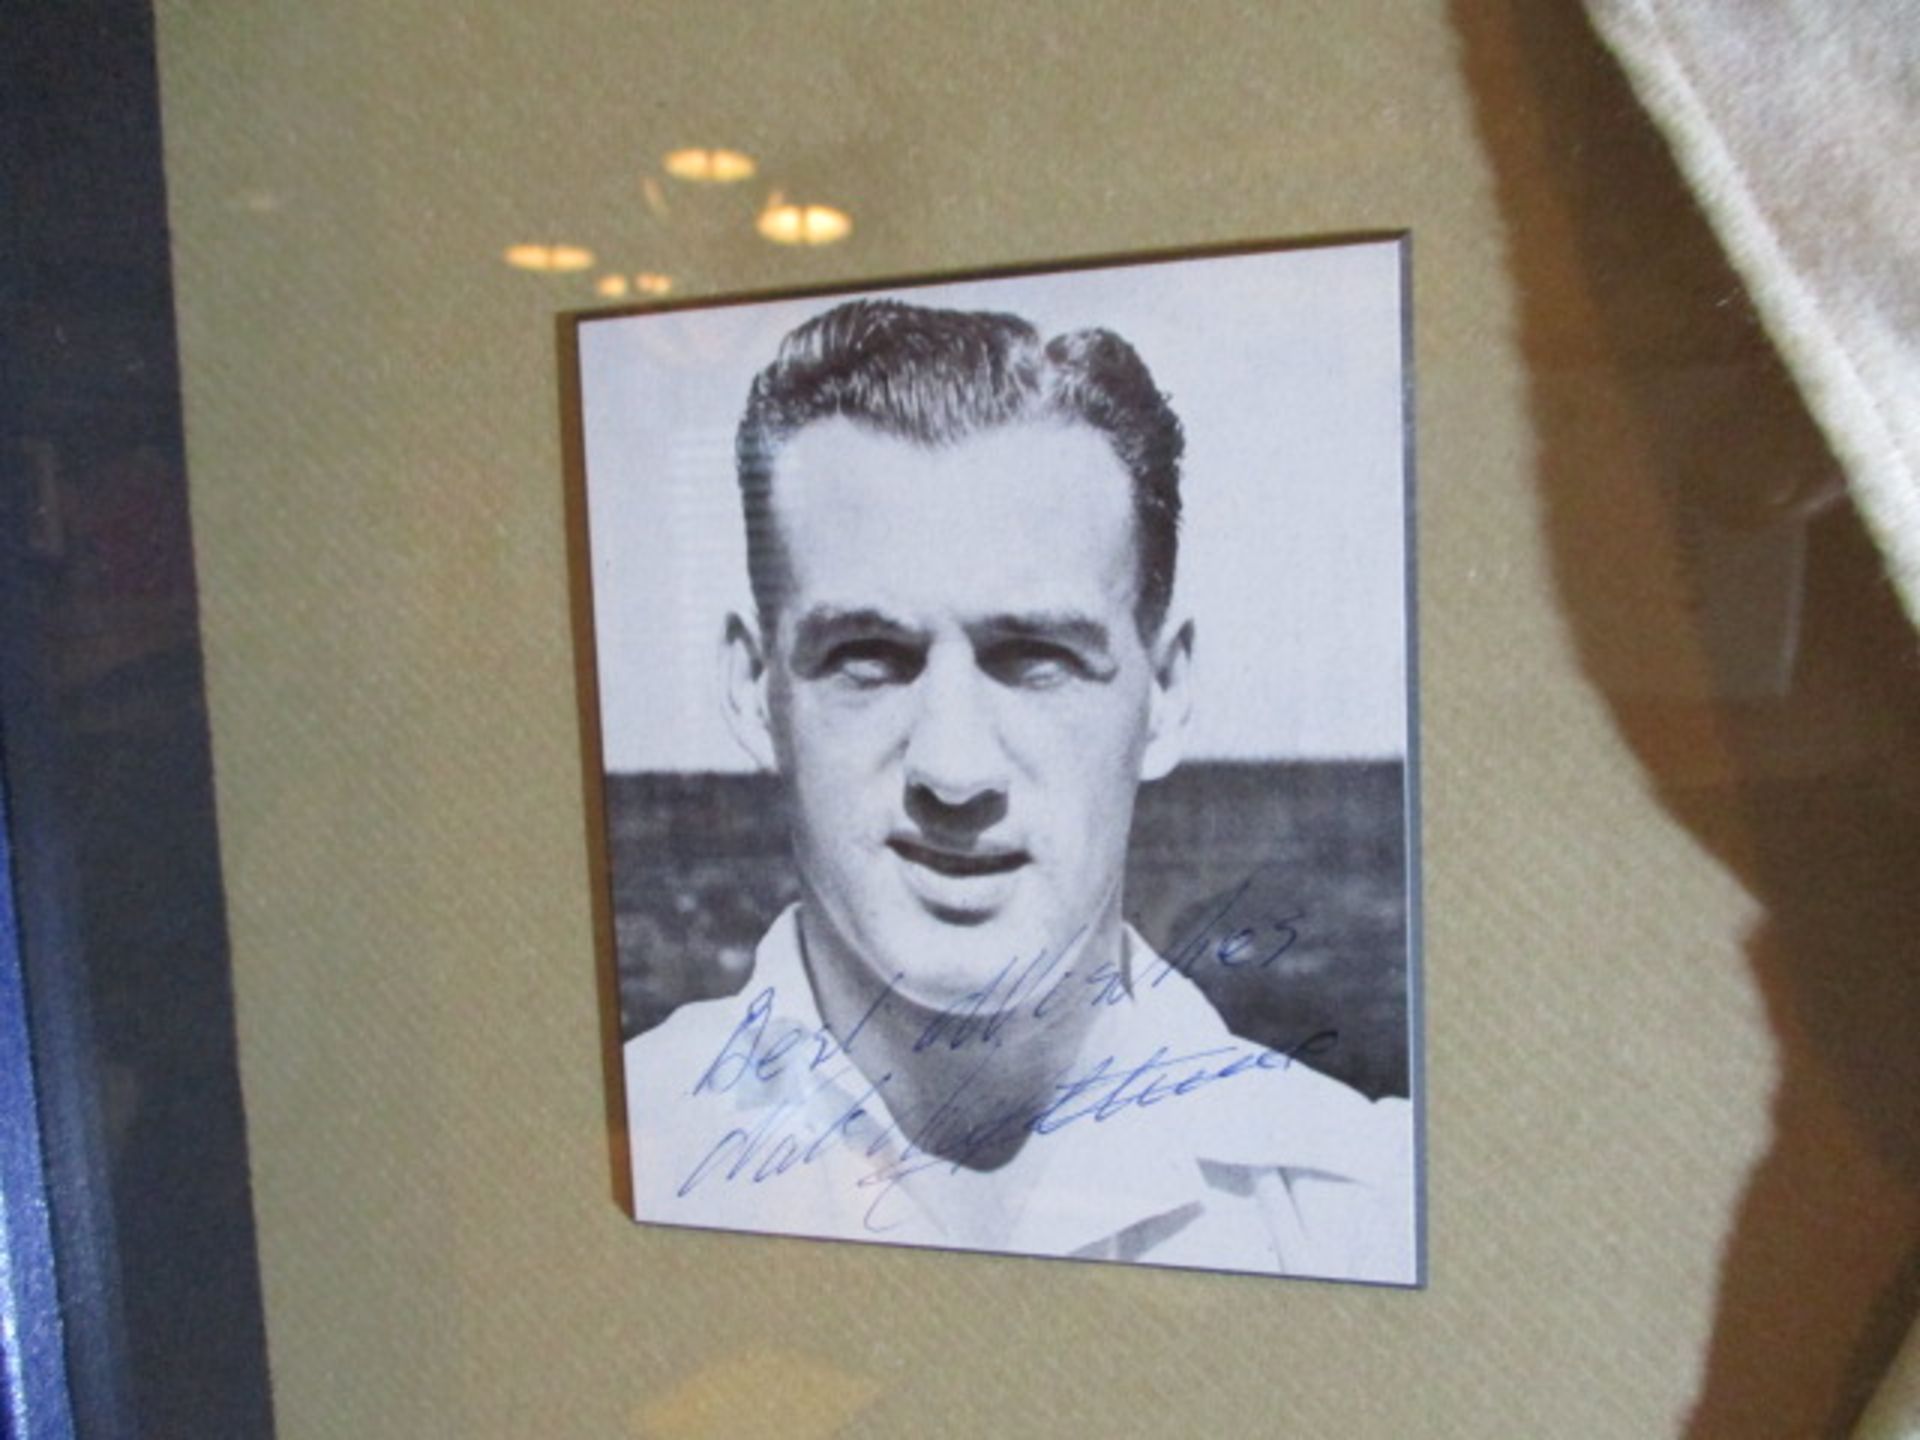 England No. 9 shirt worn by Nat Lofthouse versus Wales in a 1954 World Cup Qualifying match in - Image 7 of 7